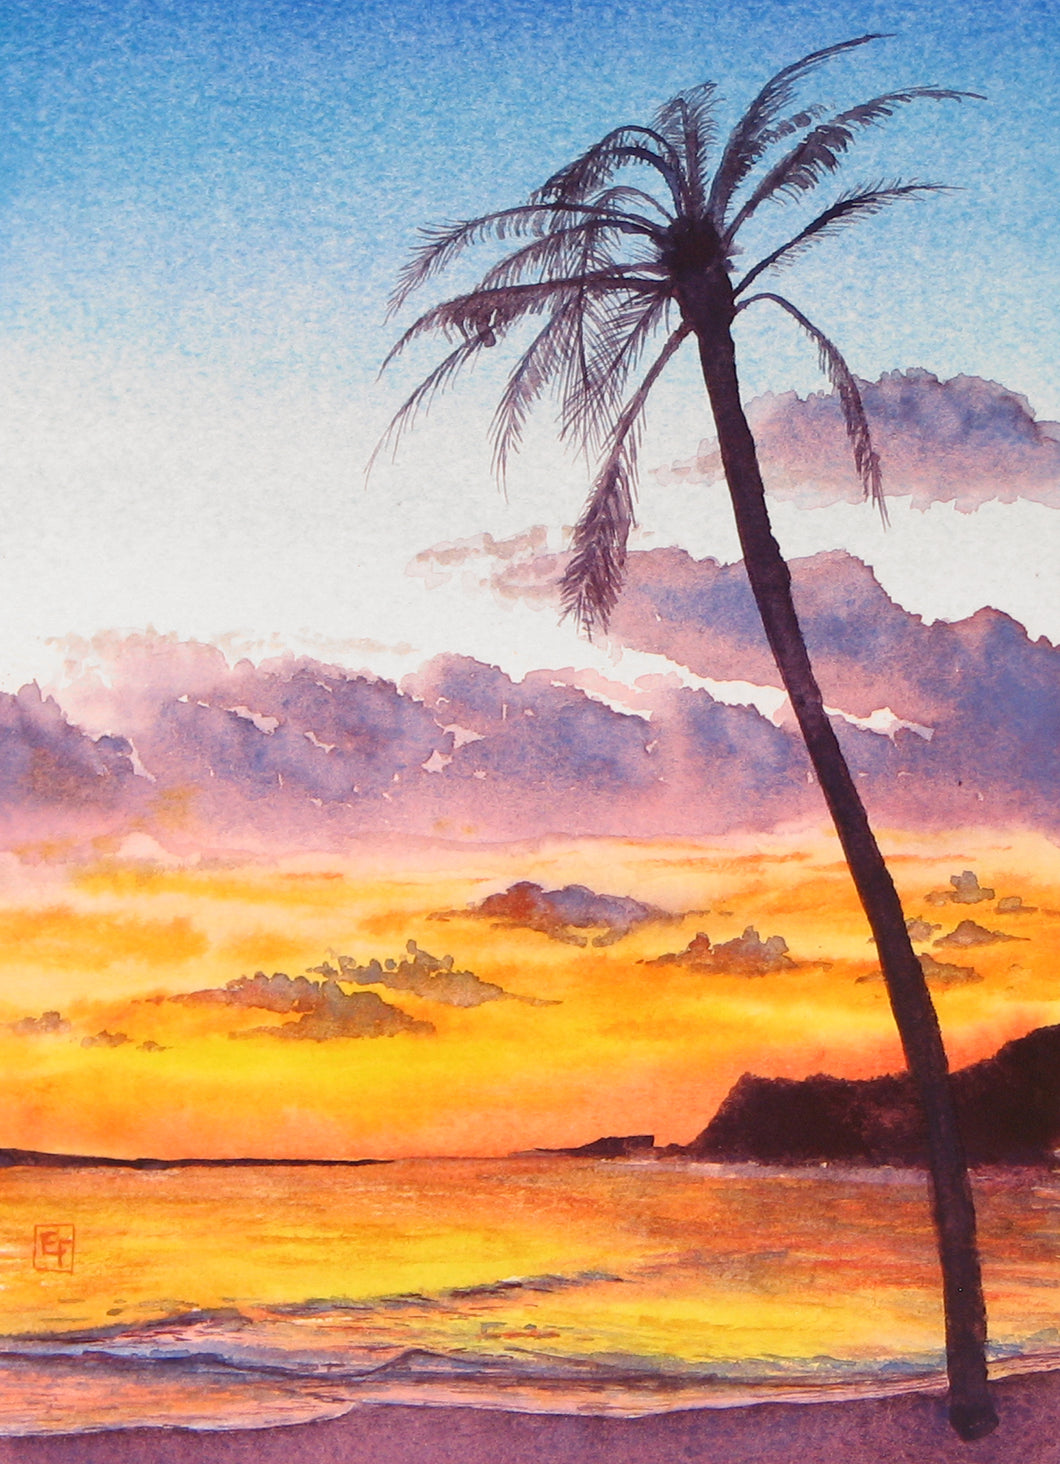 Tropical Sunset, Watercolor Sketch (8x10)